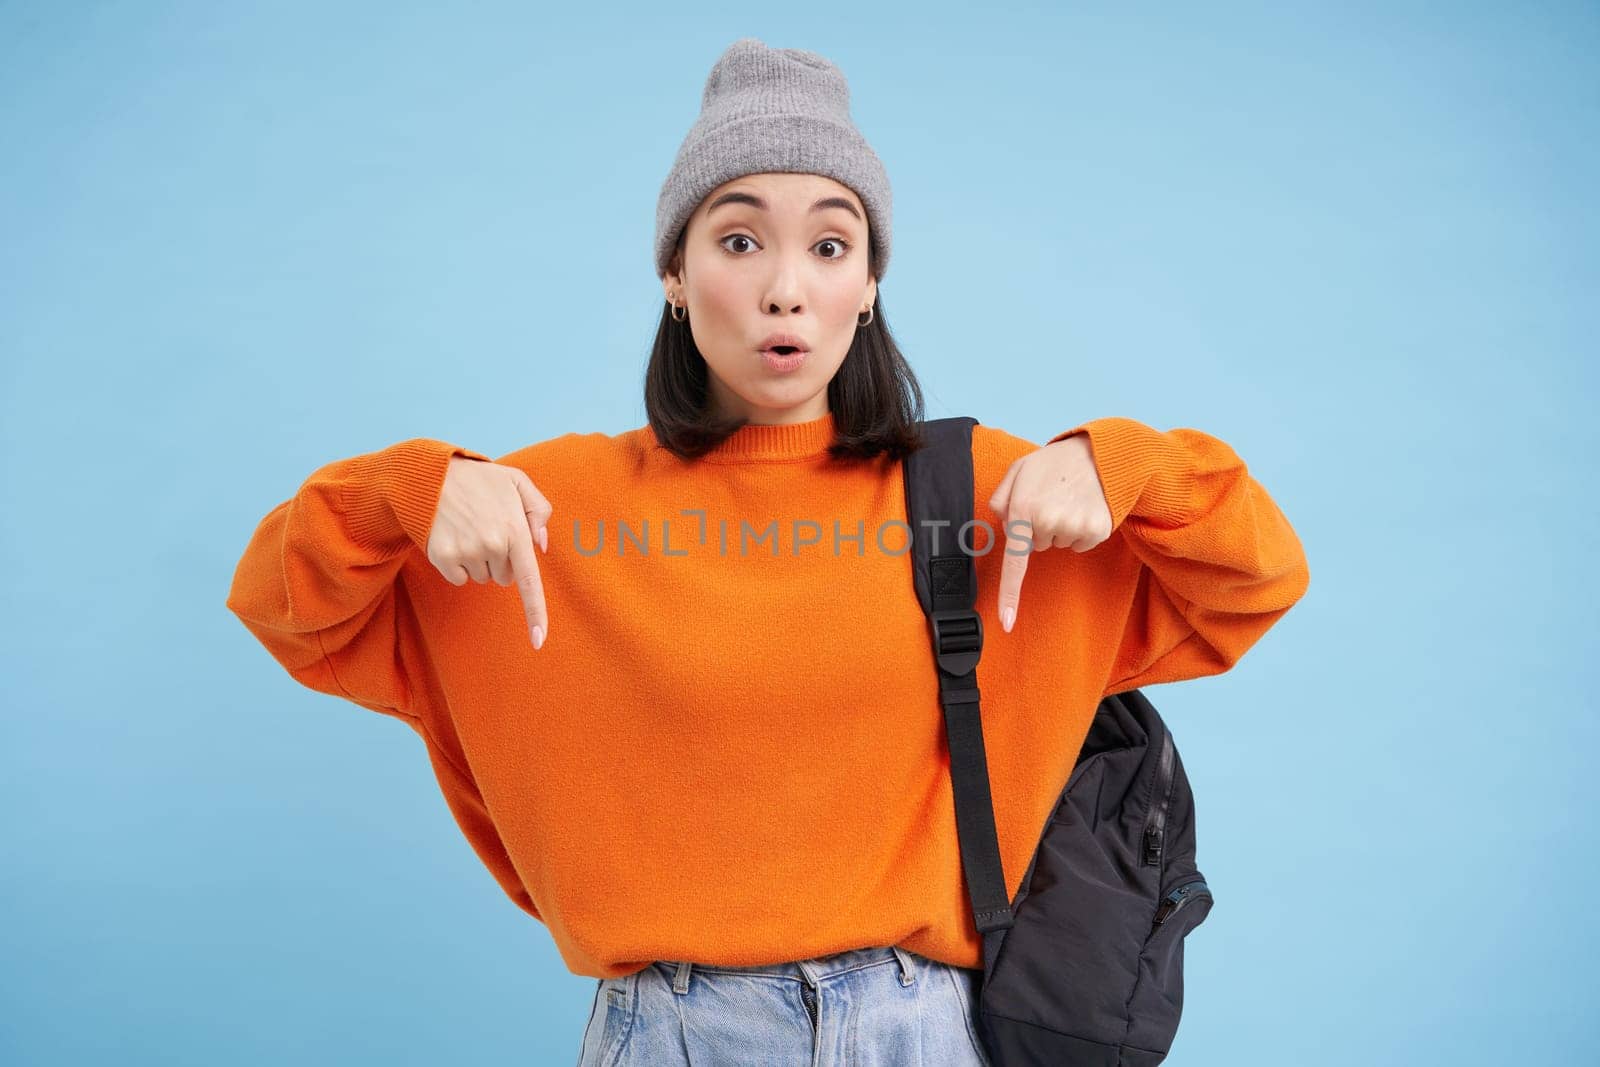 Asian woman in warm hat, wears street outfit and backpack, points fingers down, shows advertisement below, standing over blue background.